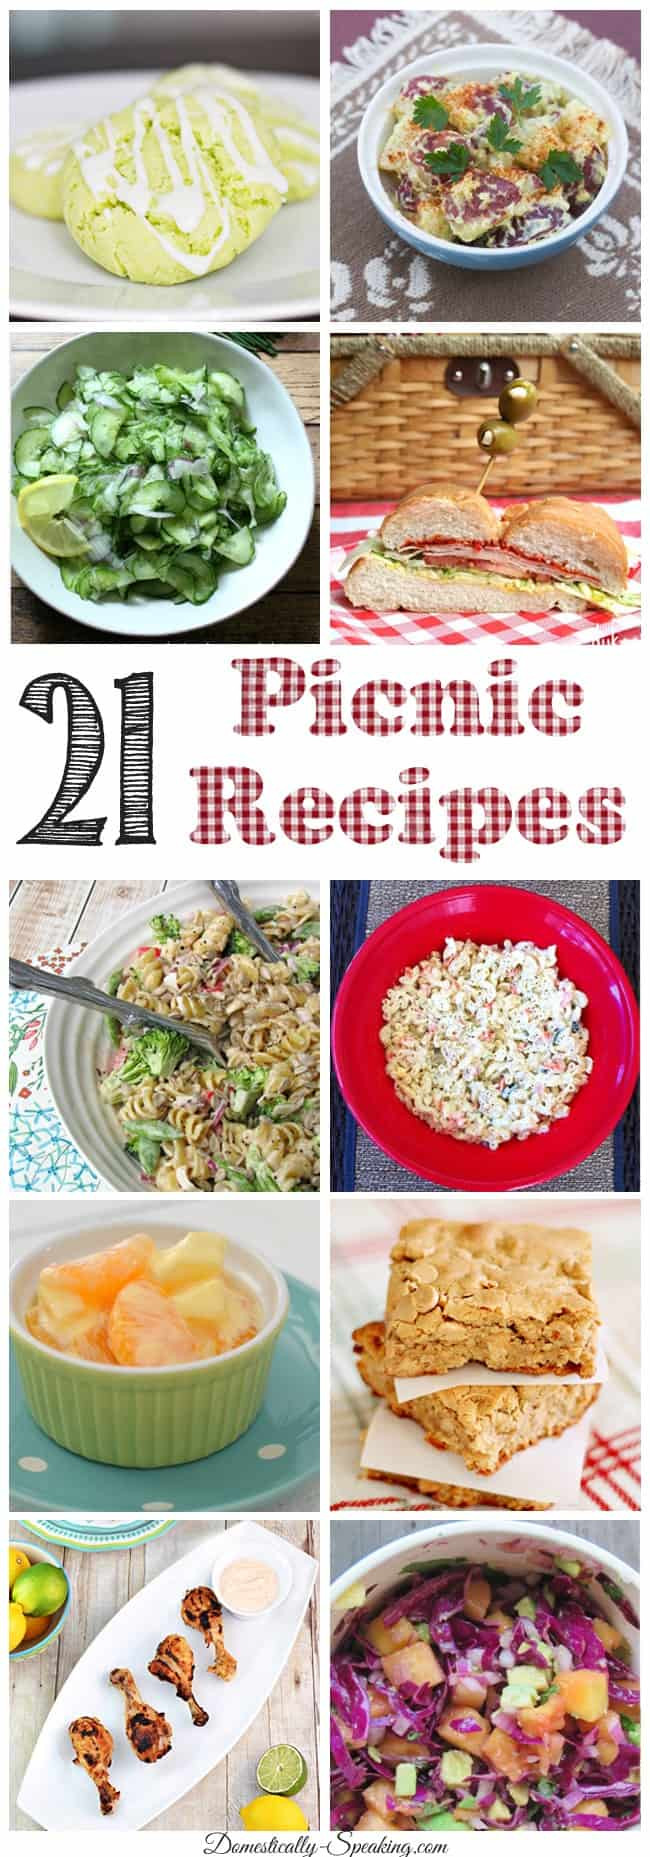 Picnic Dinner Ideas
 21 Picnic Dishes BBQ Appetizers Salads and More